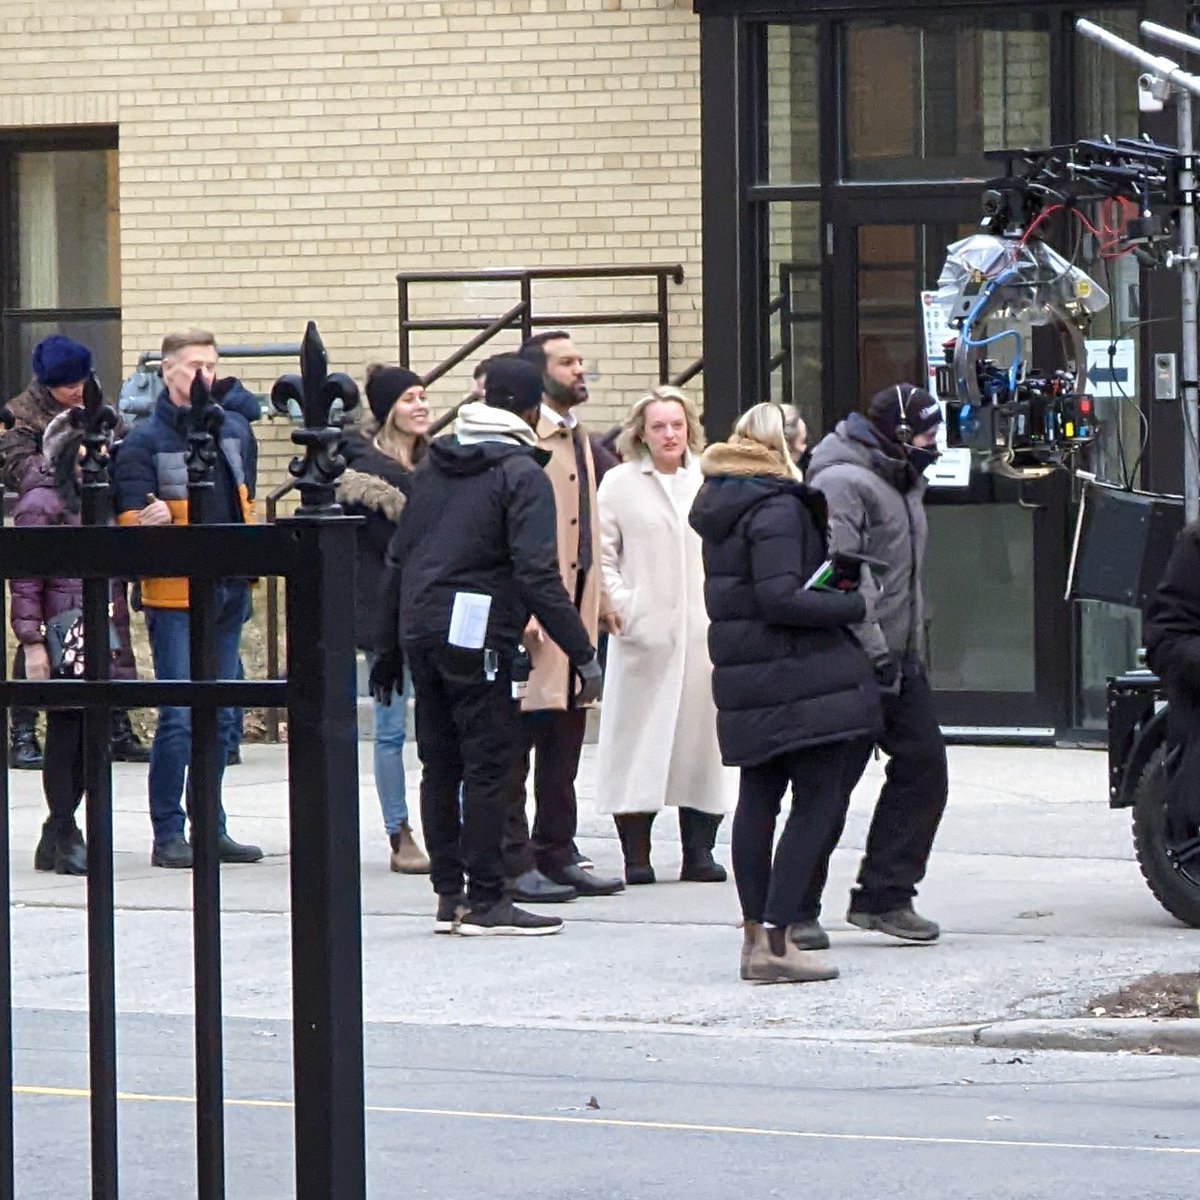 Elisabeth Moss and O-T Fagbenle
were shooting a scene together for The Handmaid's Tale season 5 at a location for the US Consulate in Toronto. Elisabeth was also filming a scene with Nichole at a park earlier today. #rubyroad #handmaidstale
@TOFilming_EM